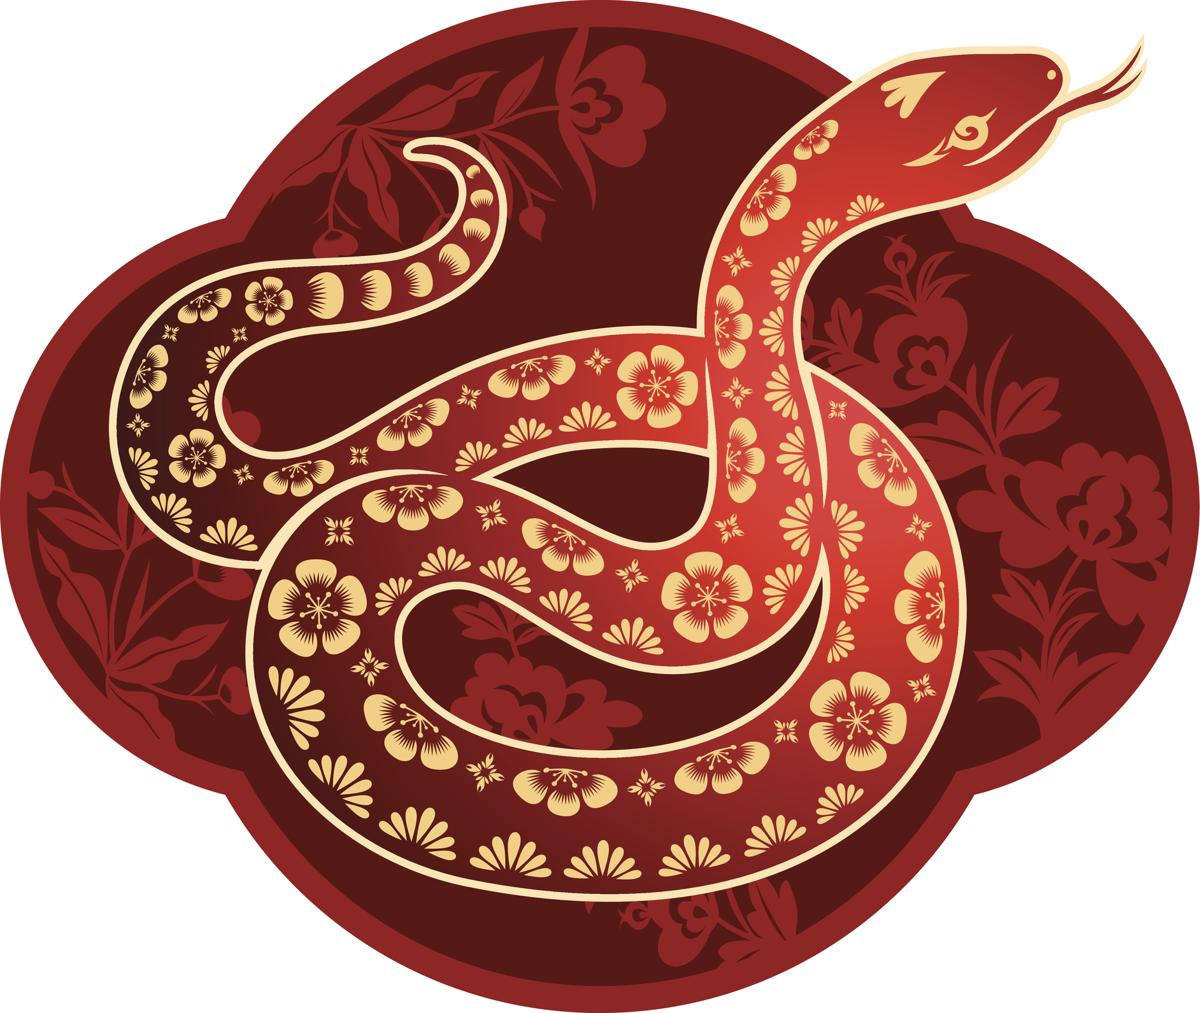 What is snake Chinese zodiac?